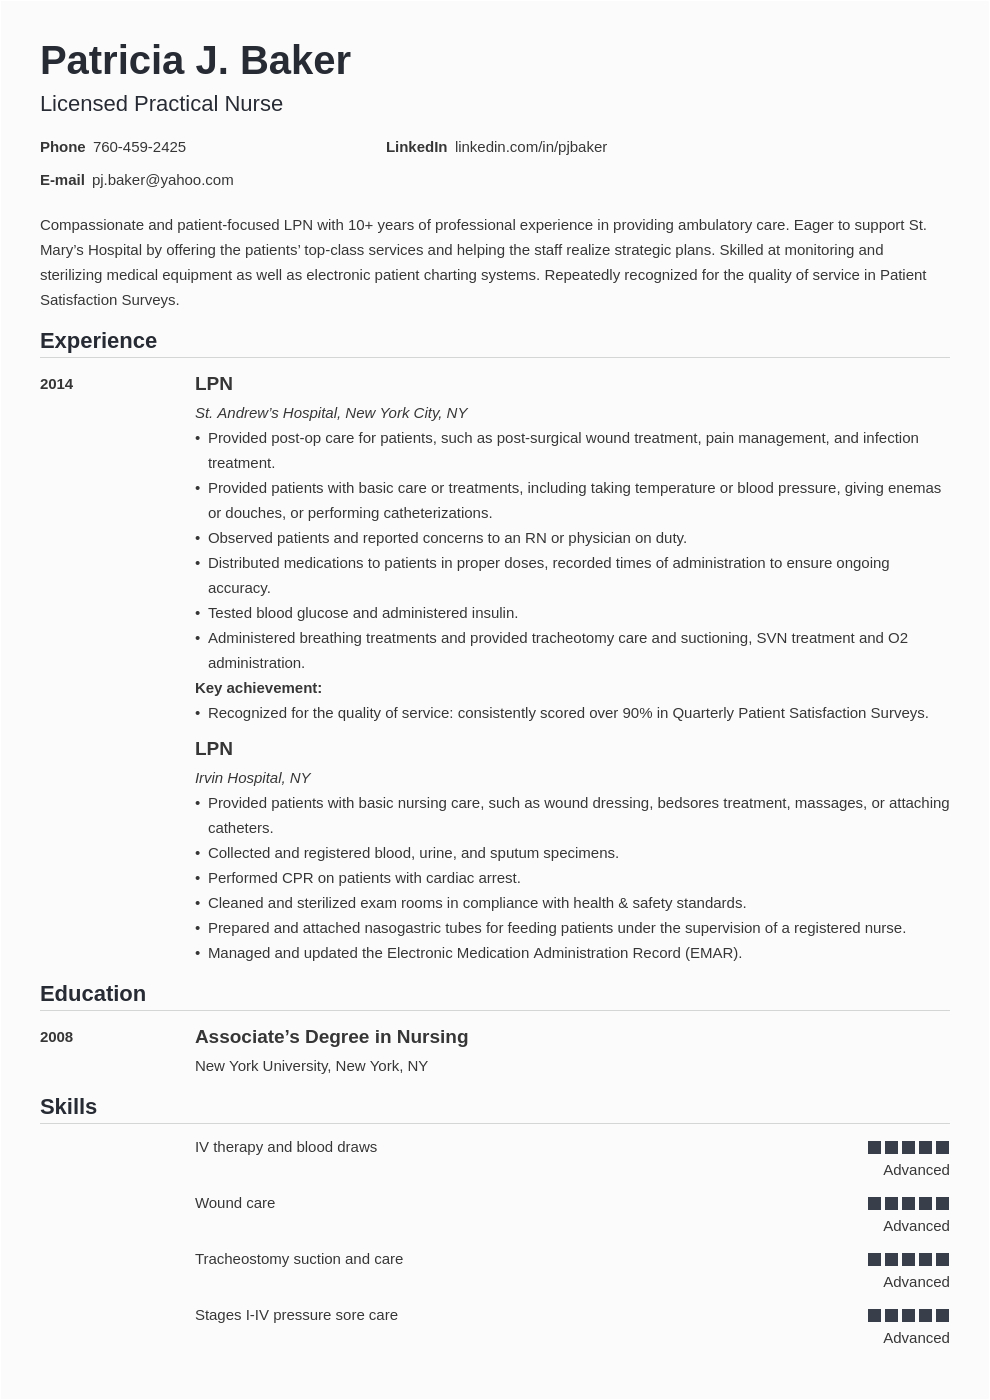 Sample Resume for Nurses with No Experience Nursing Student Resume with No Experience Karoosha